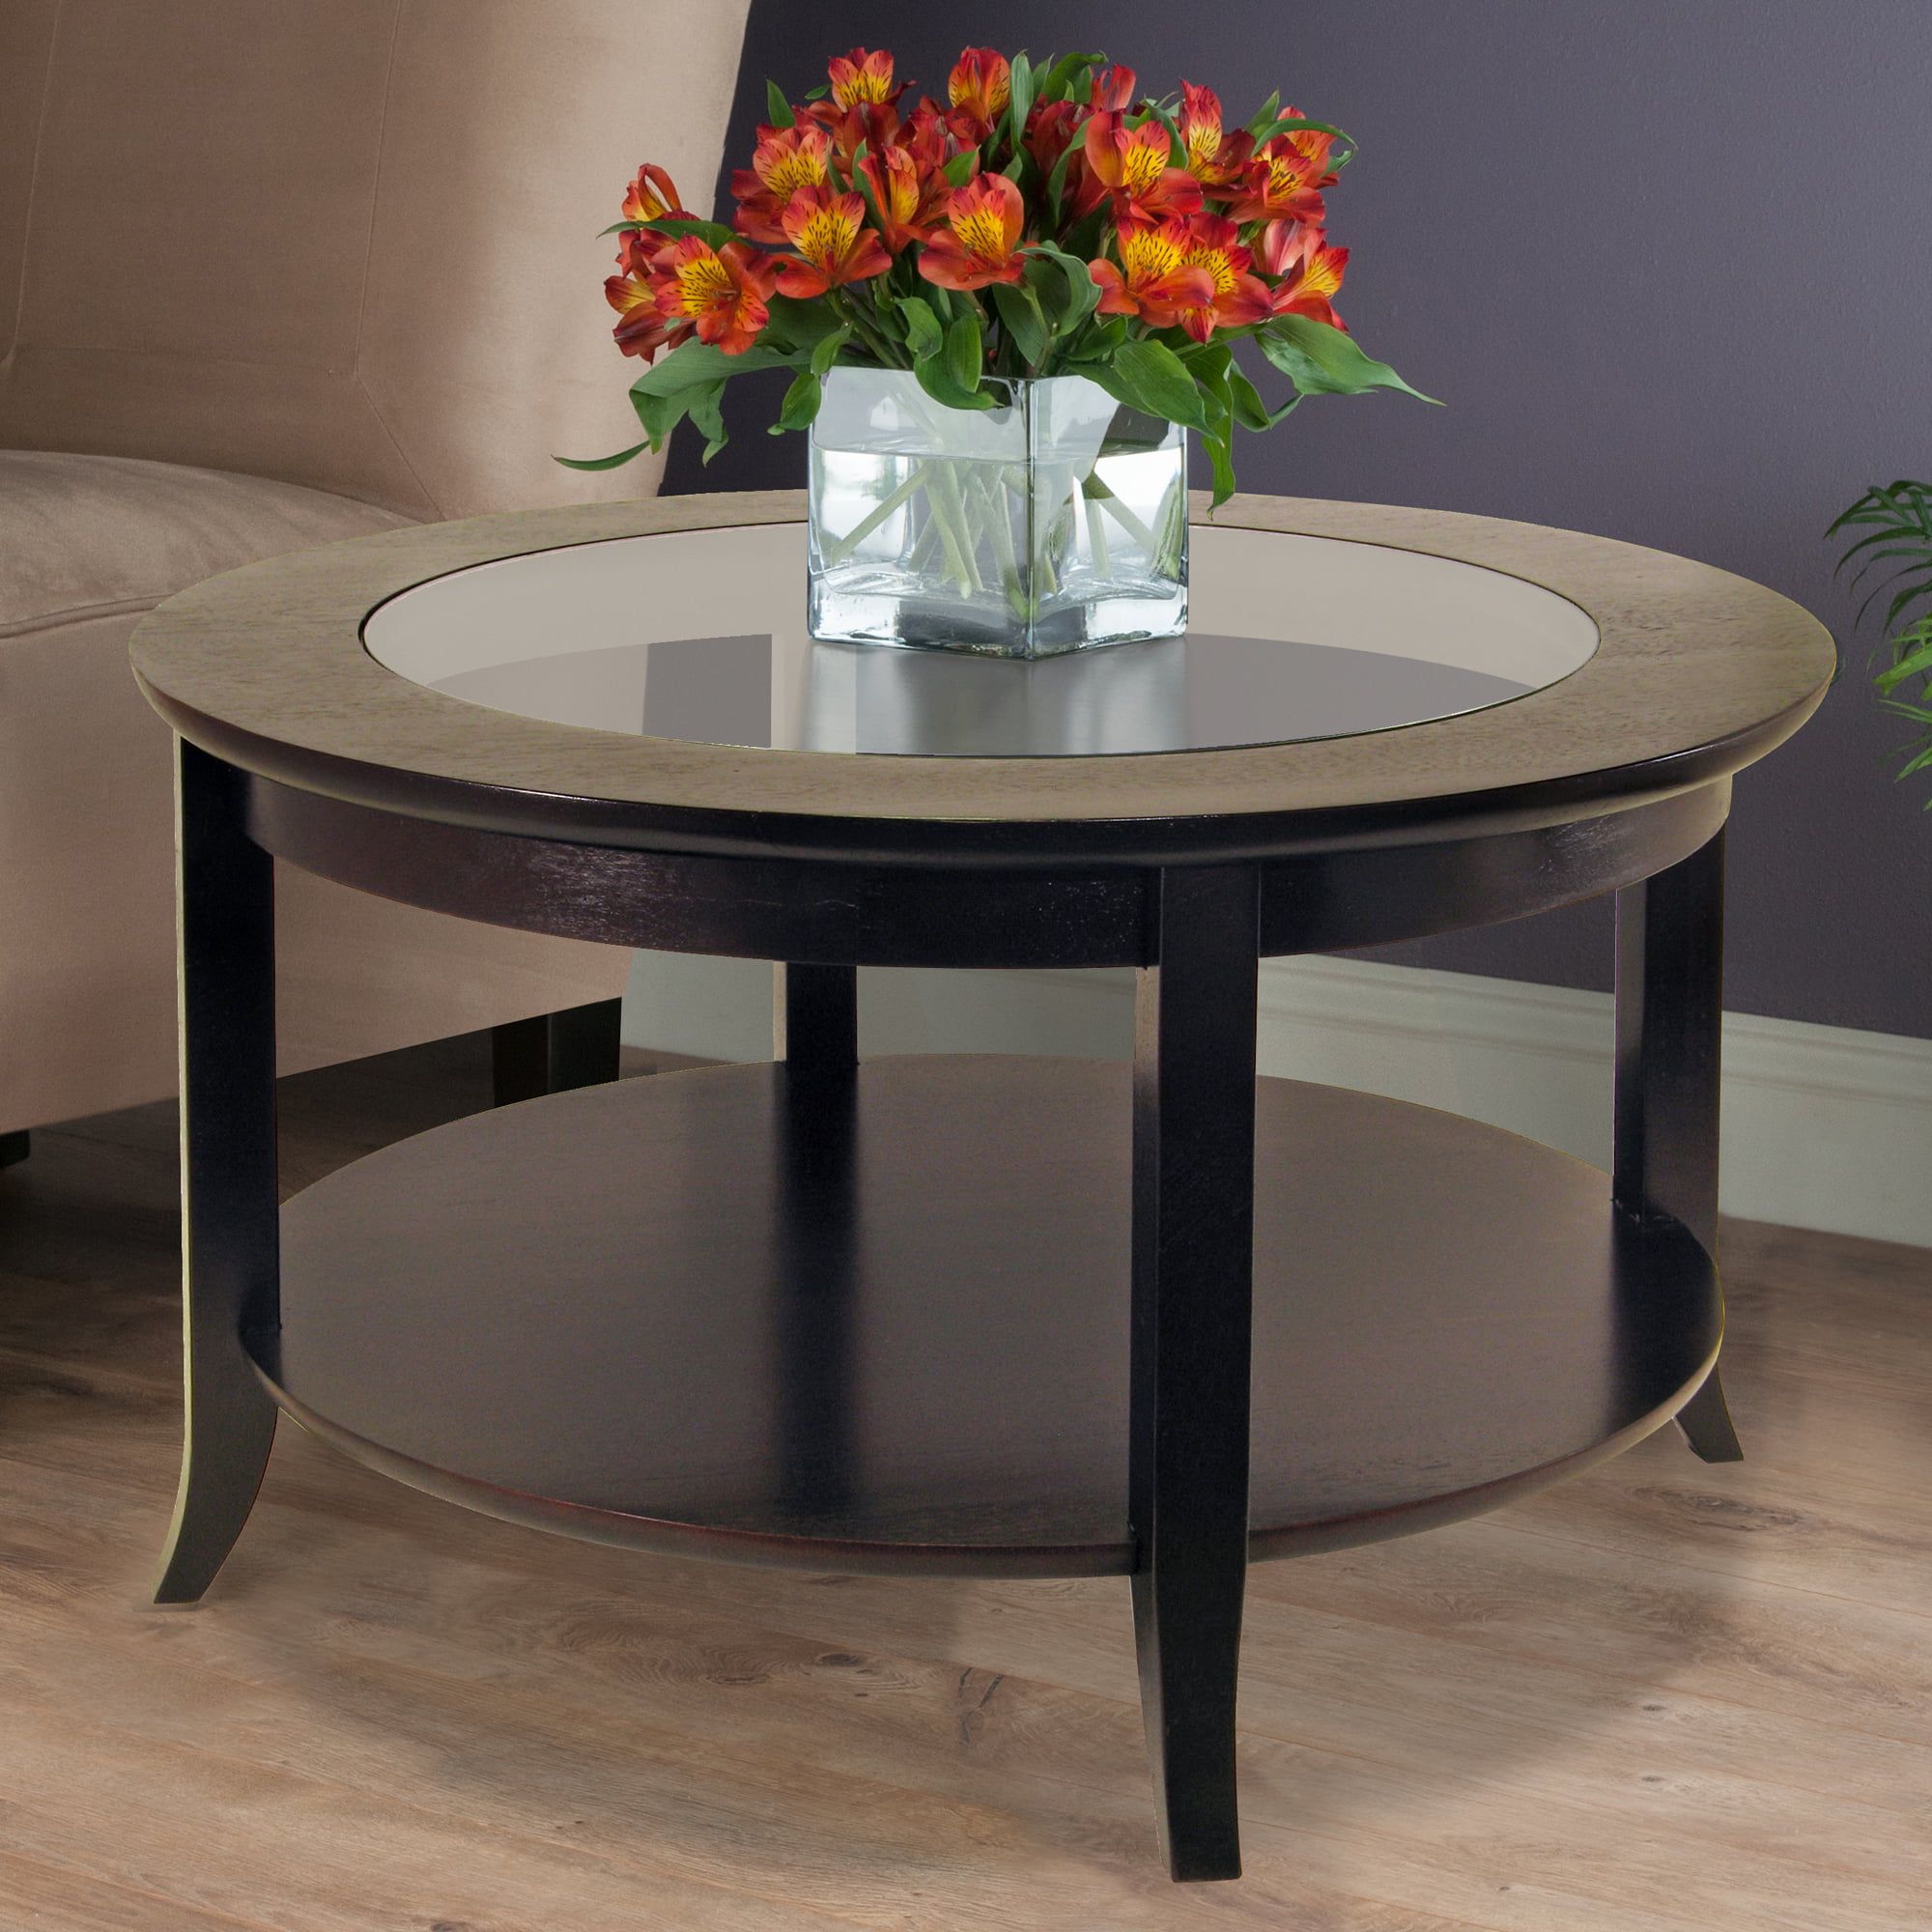 Winsome Wood Genoa Round Coffee Table With Glass Top, Espresso Finish Inside Round Coffee Tables (Gallery 4 of 20)